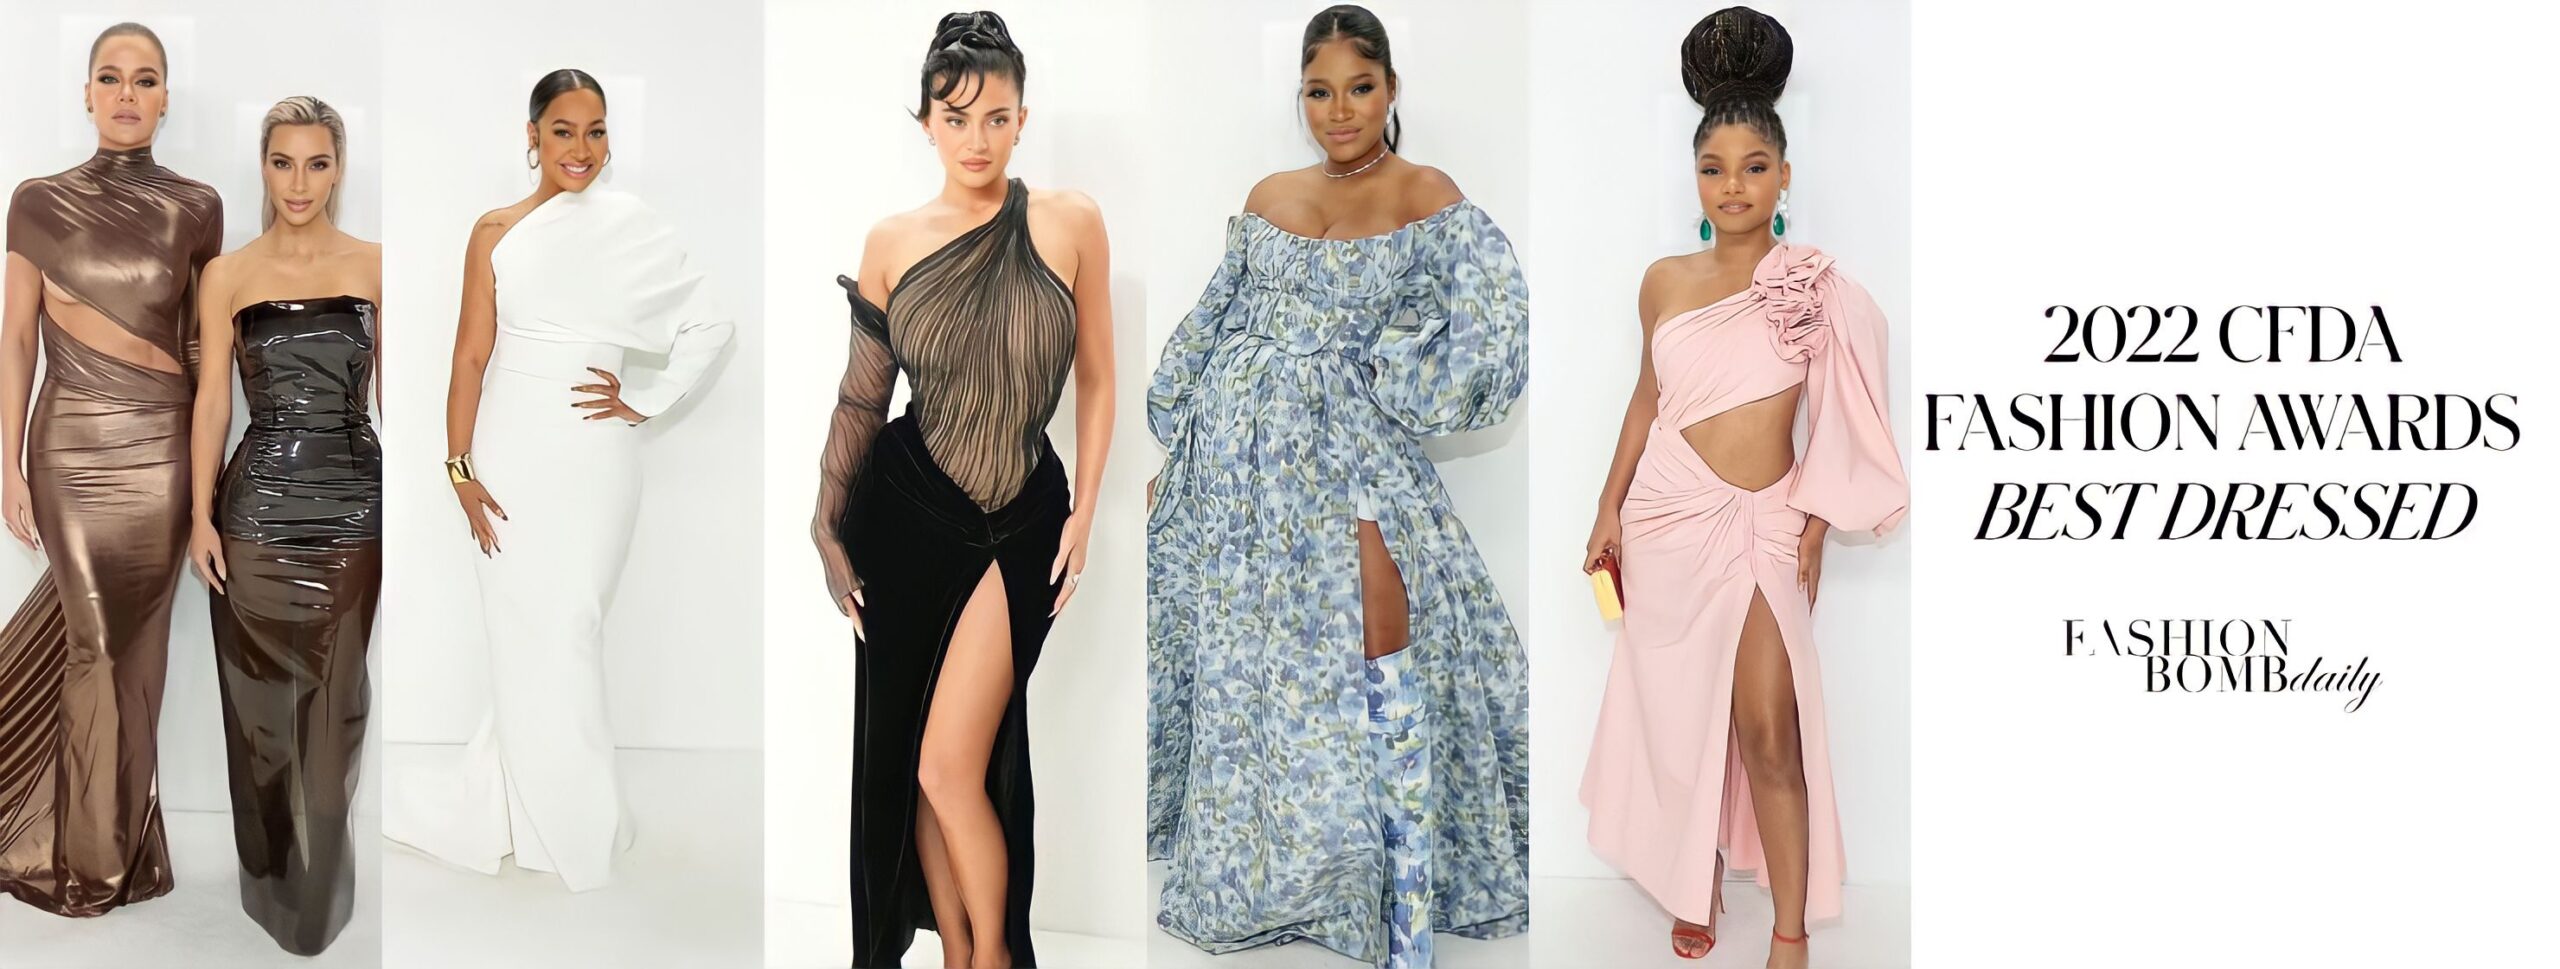 Rihanna, Andre Leon Talley, Law Roach, more Black fashion icons